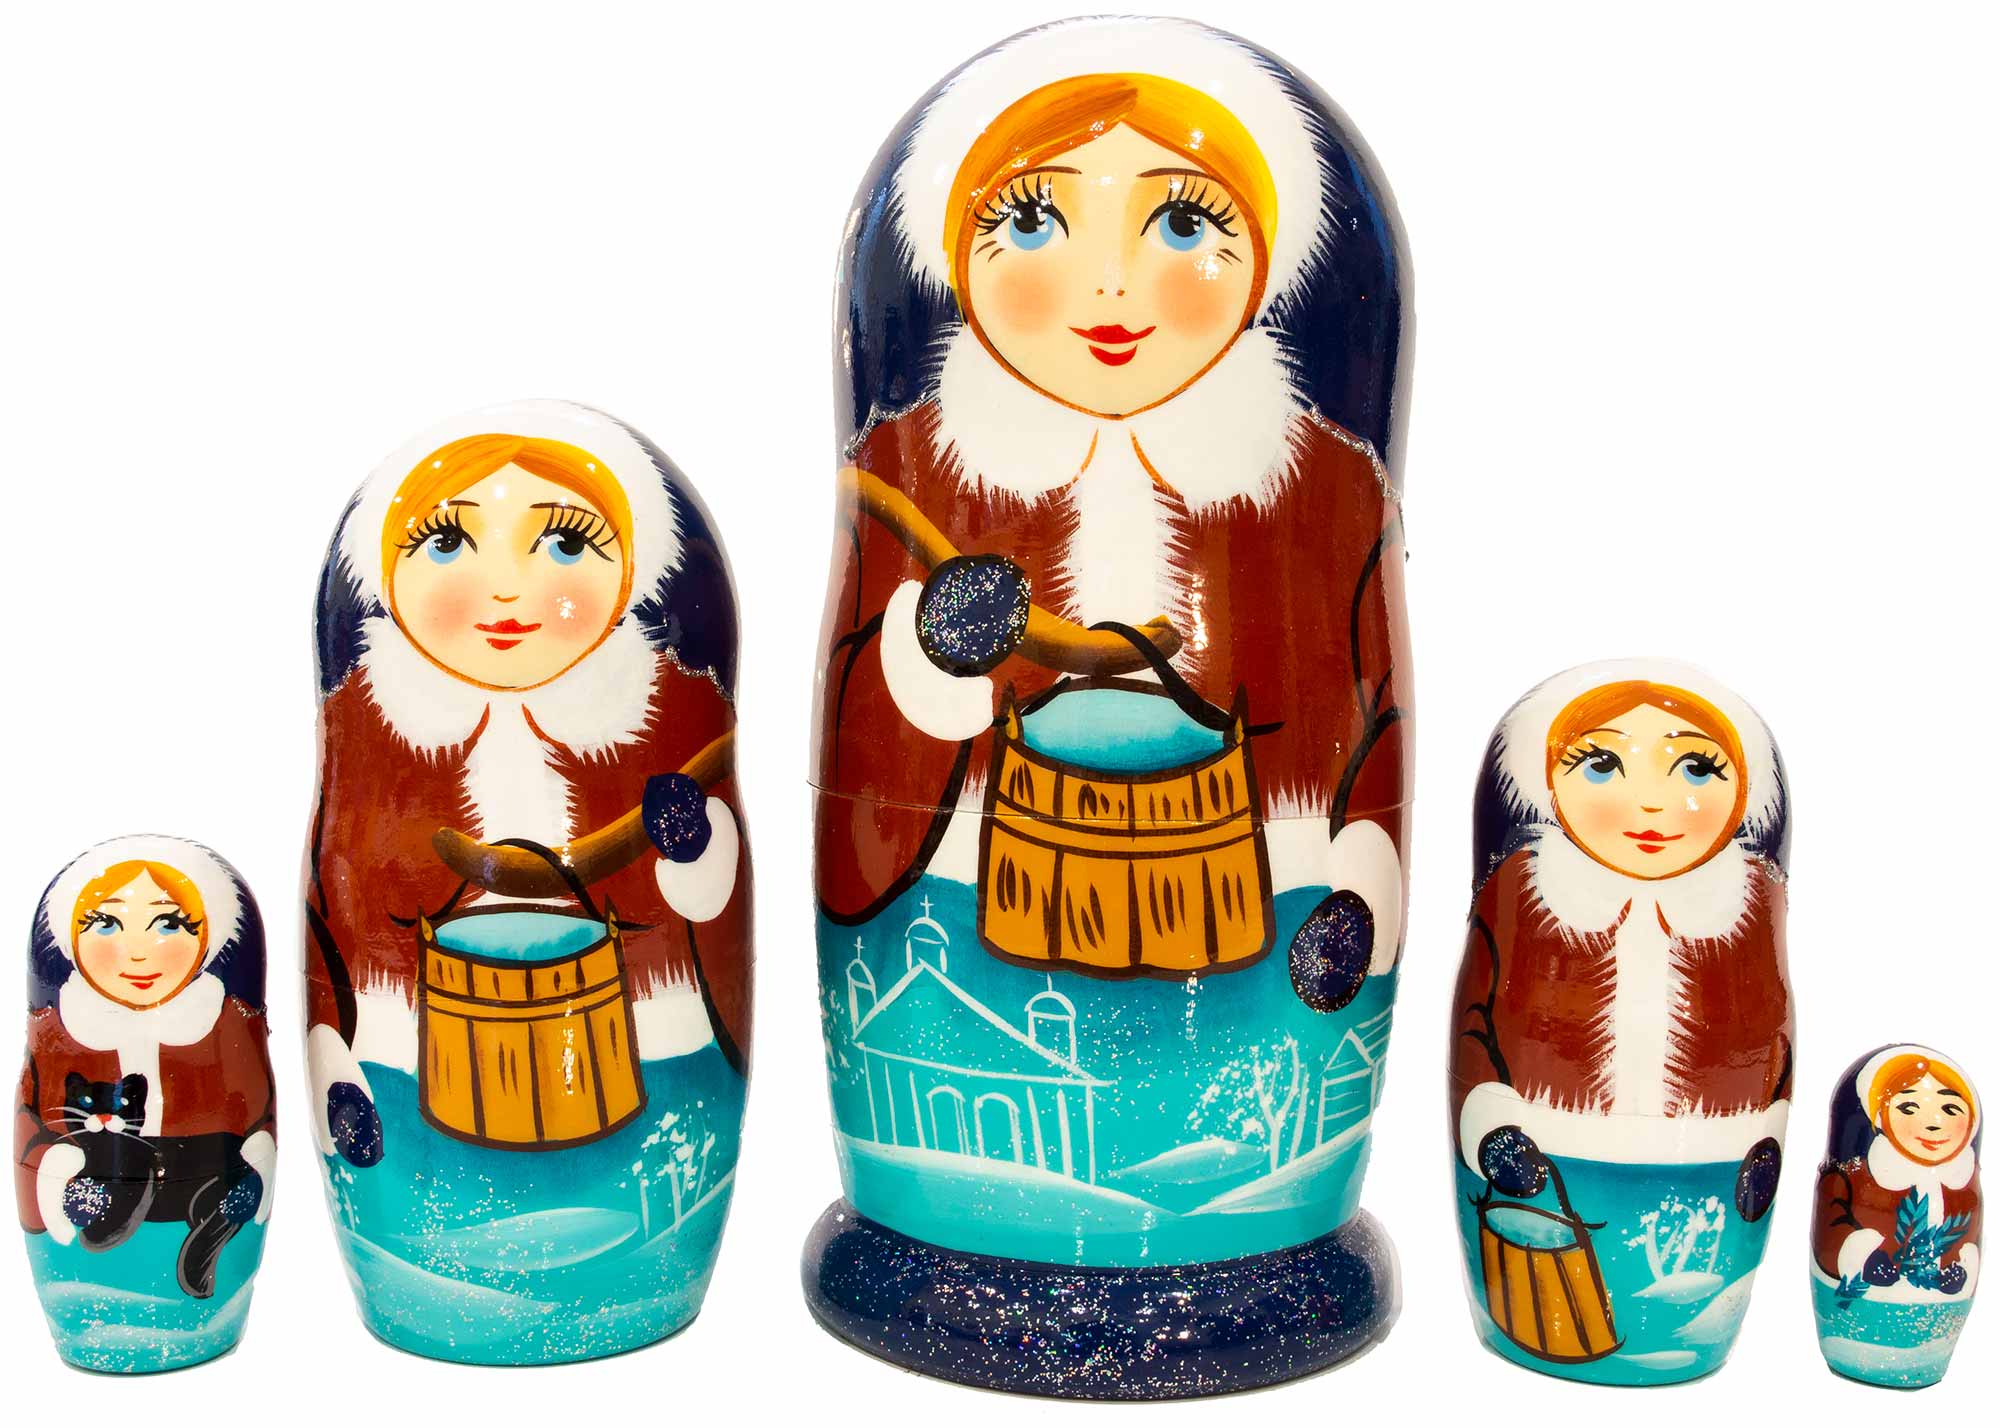 Buy Water Carrier Classical Nesting Doll 5pc./6" at GoldenCockerel.com